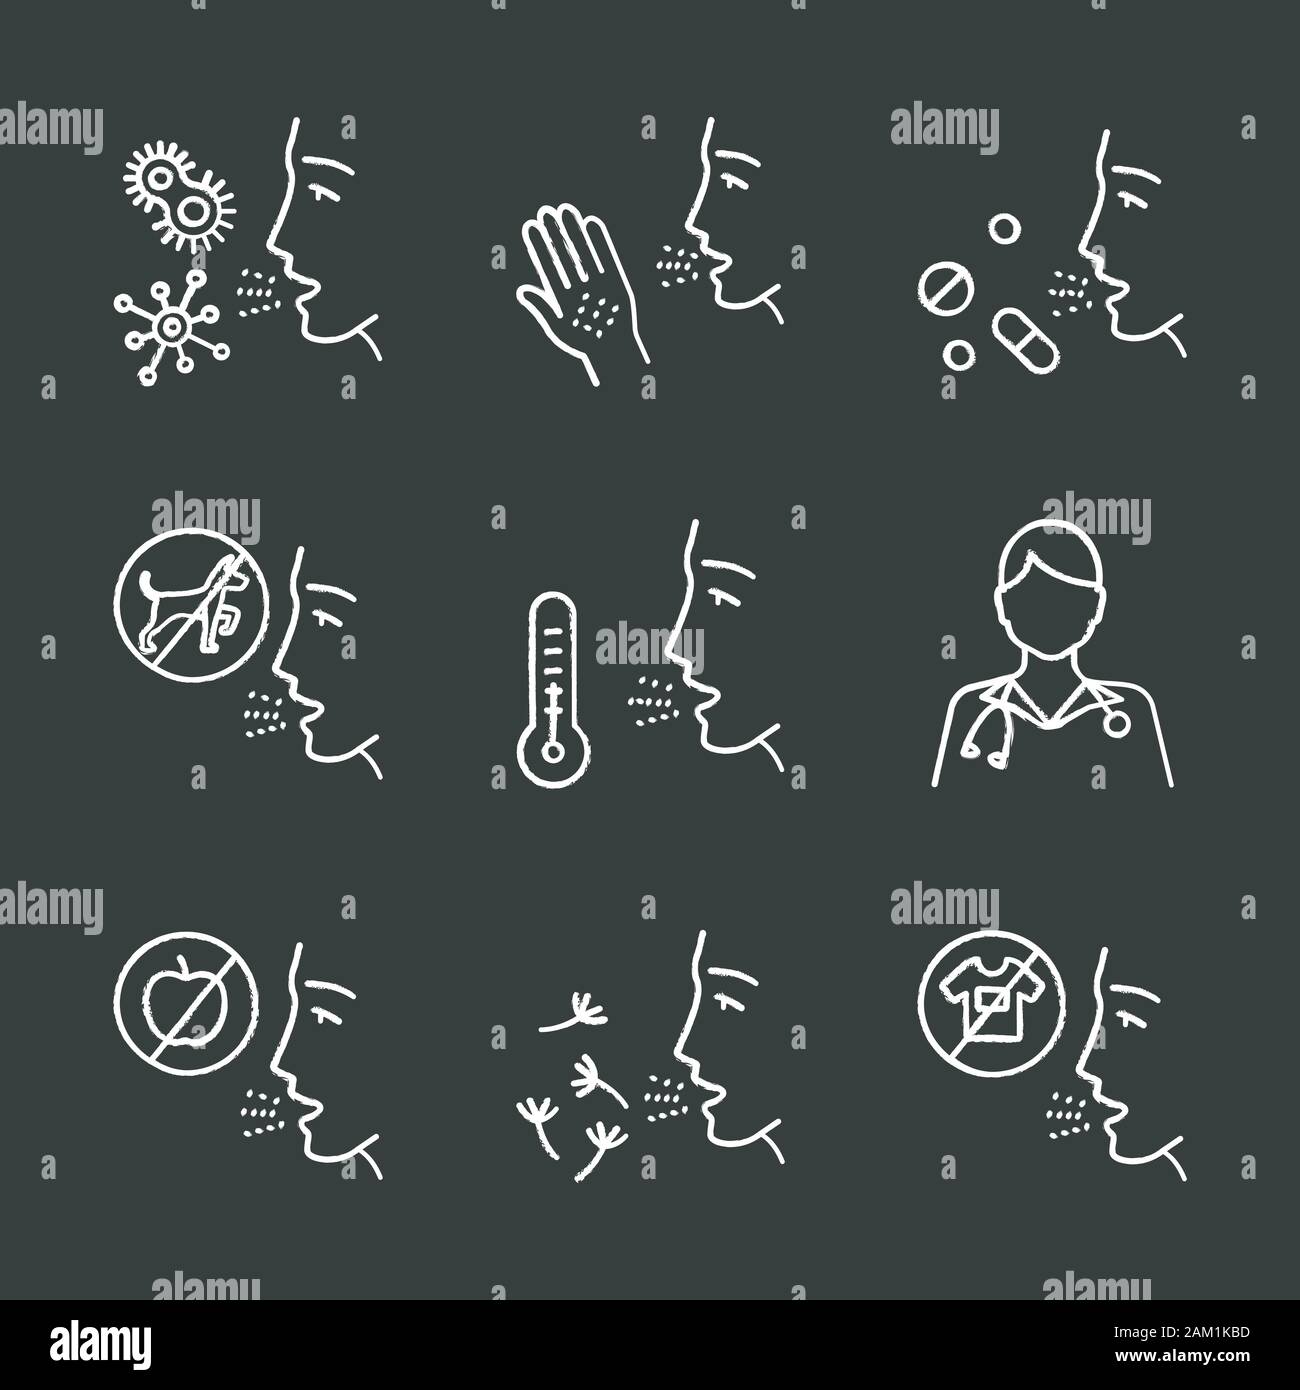 Allergies chalk icons set. Contact, food, respiratory diseases. Allergen sources. Diagnosis and medication. Hypersensitivity of immune system. Medical Stock Vector